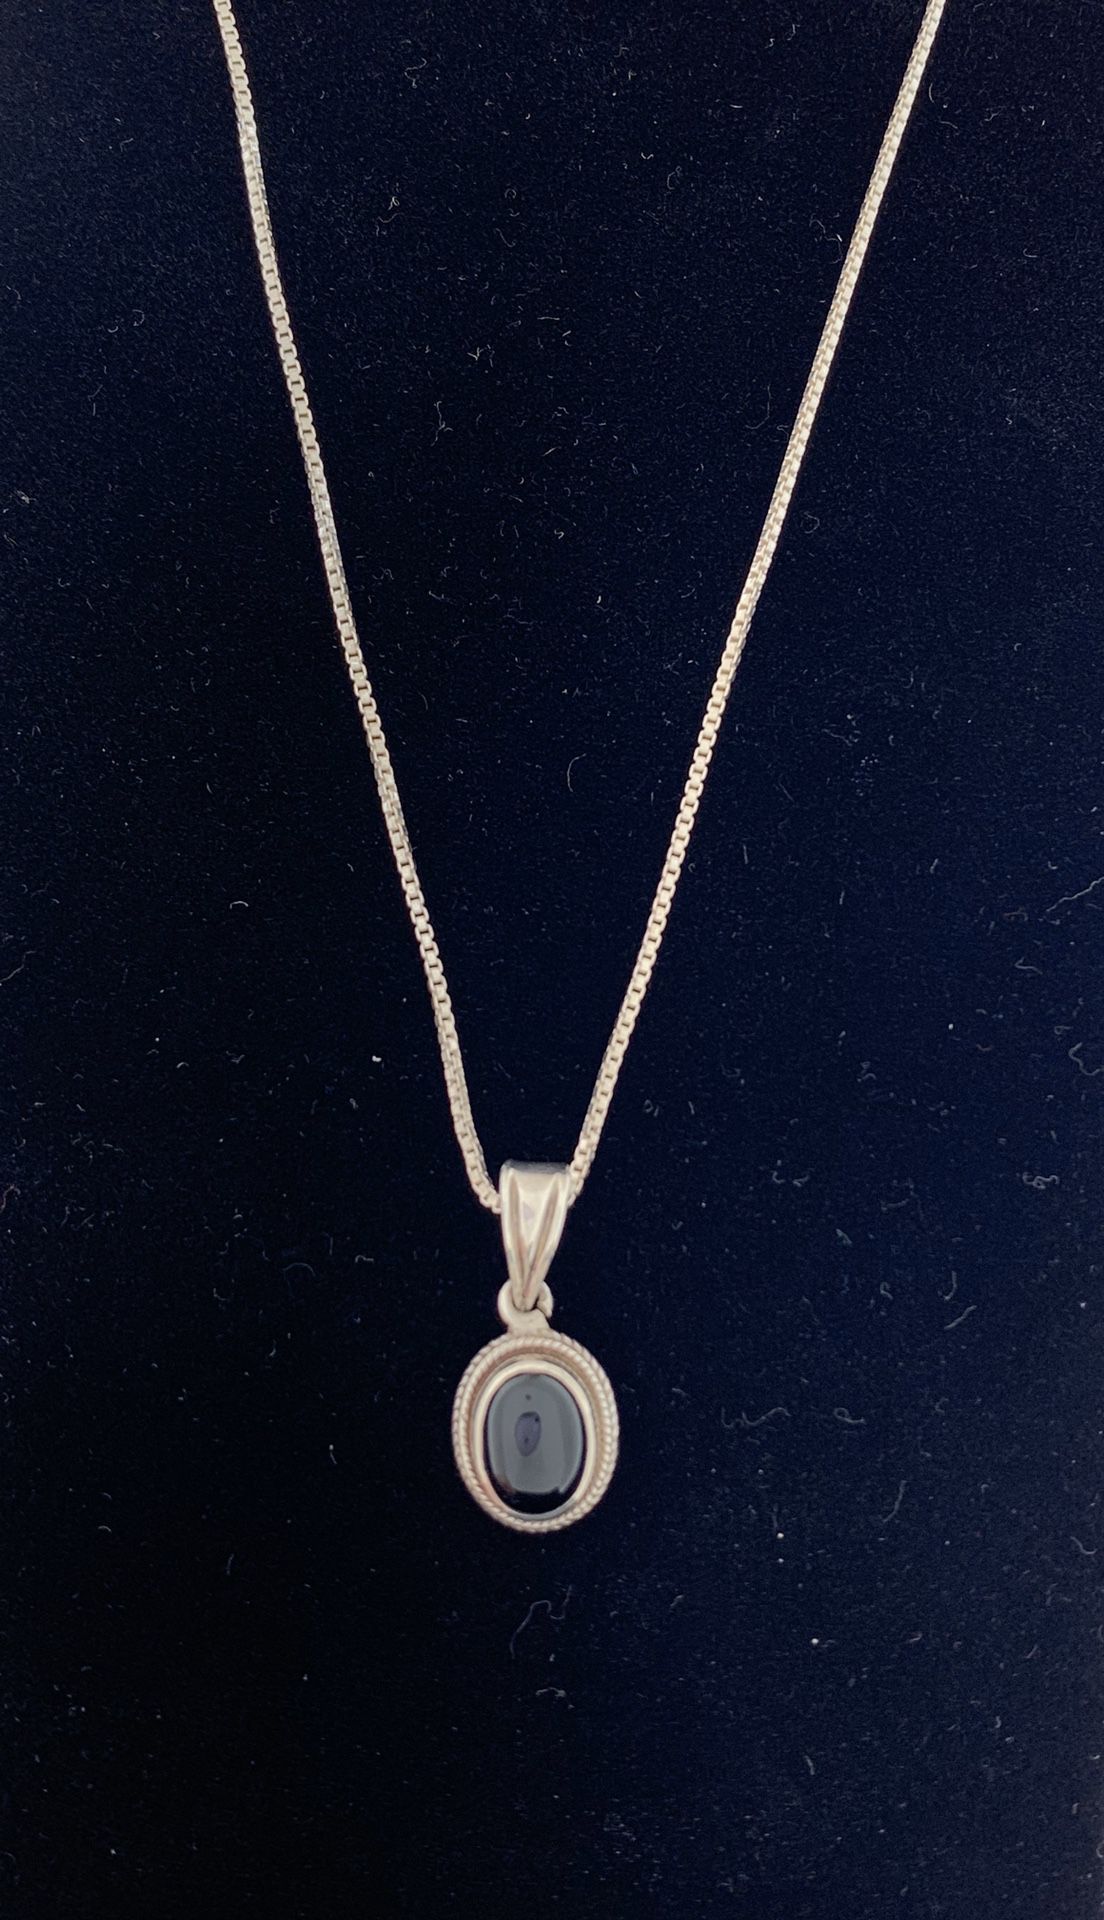 Stamped and Tested Silver Onyx Pendant Necklace